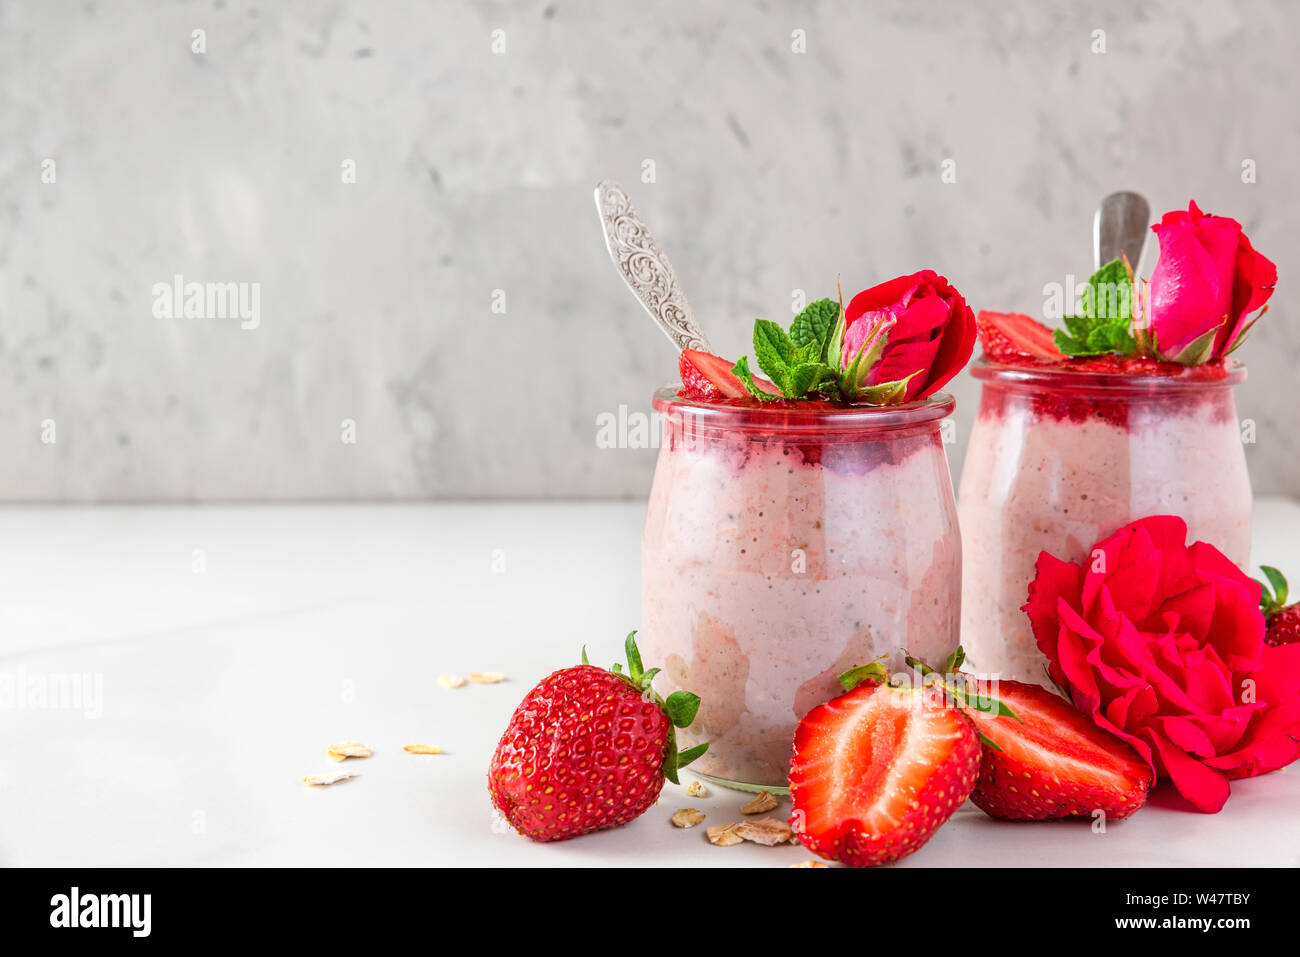 healthy diet breakfast dessert. strawberry overnight oats with fresh berries and mint with rose flowers on white marble table. close up Stock Photo